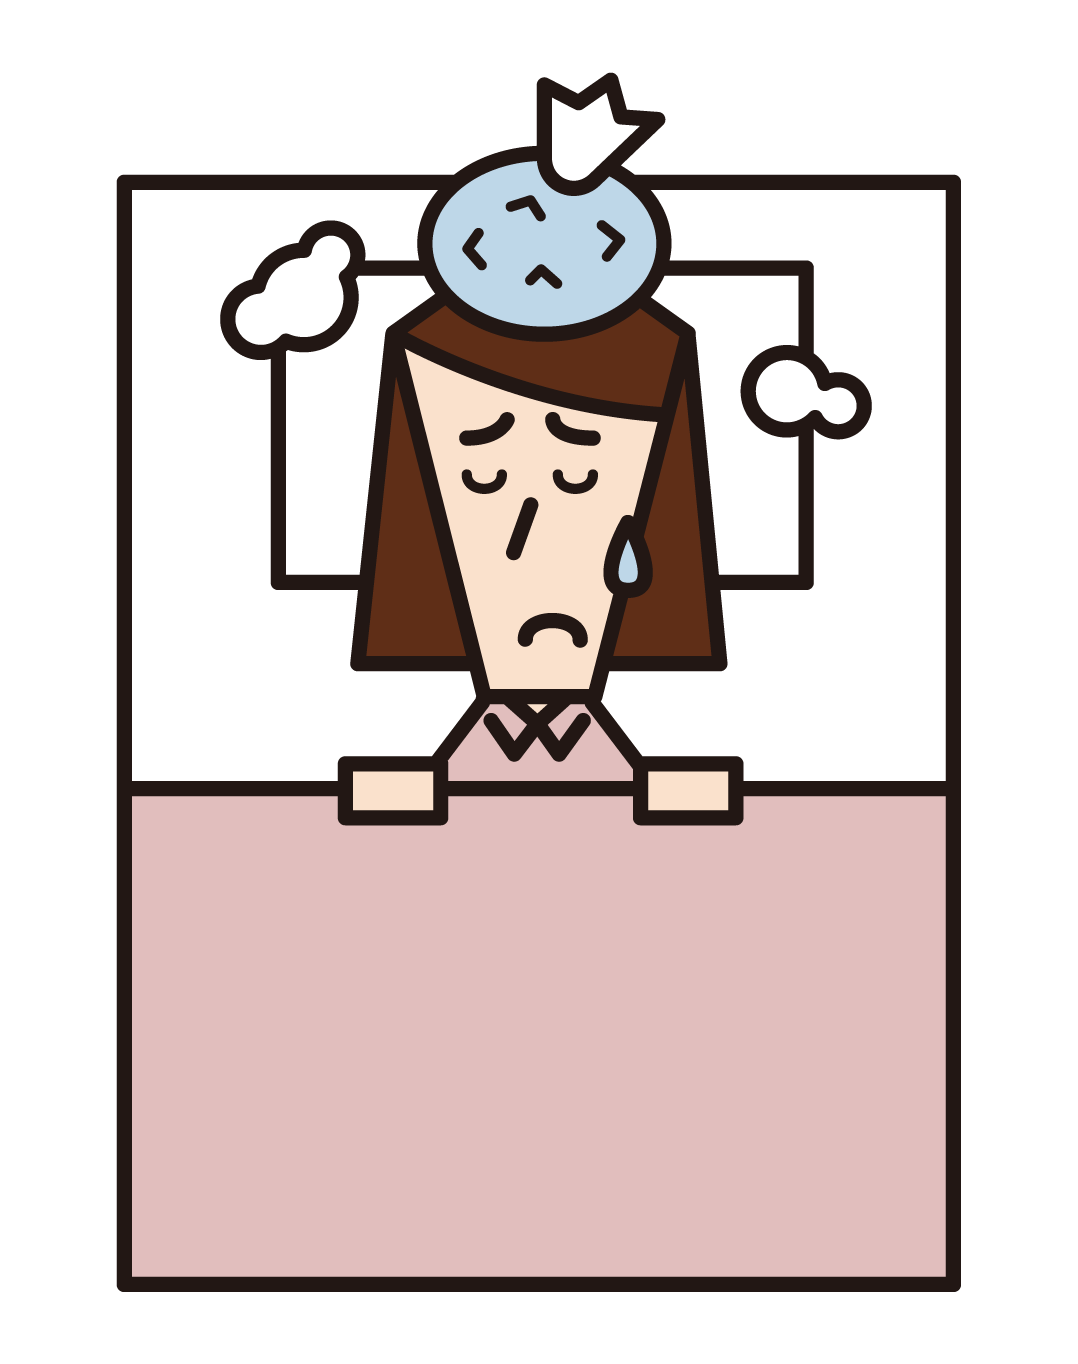 Illustration of a woman who has a cold and goes to bed